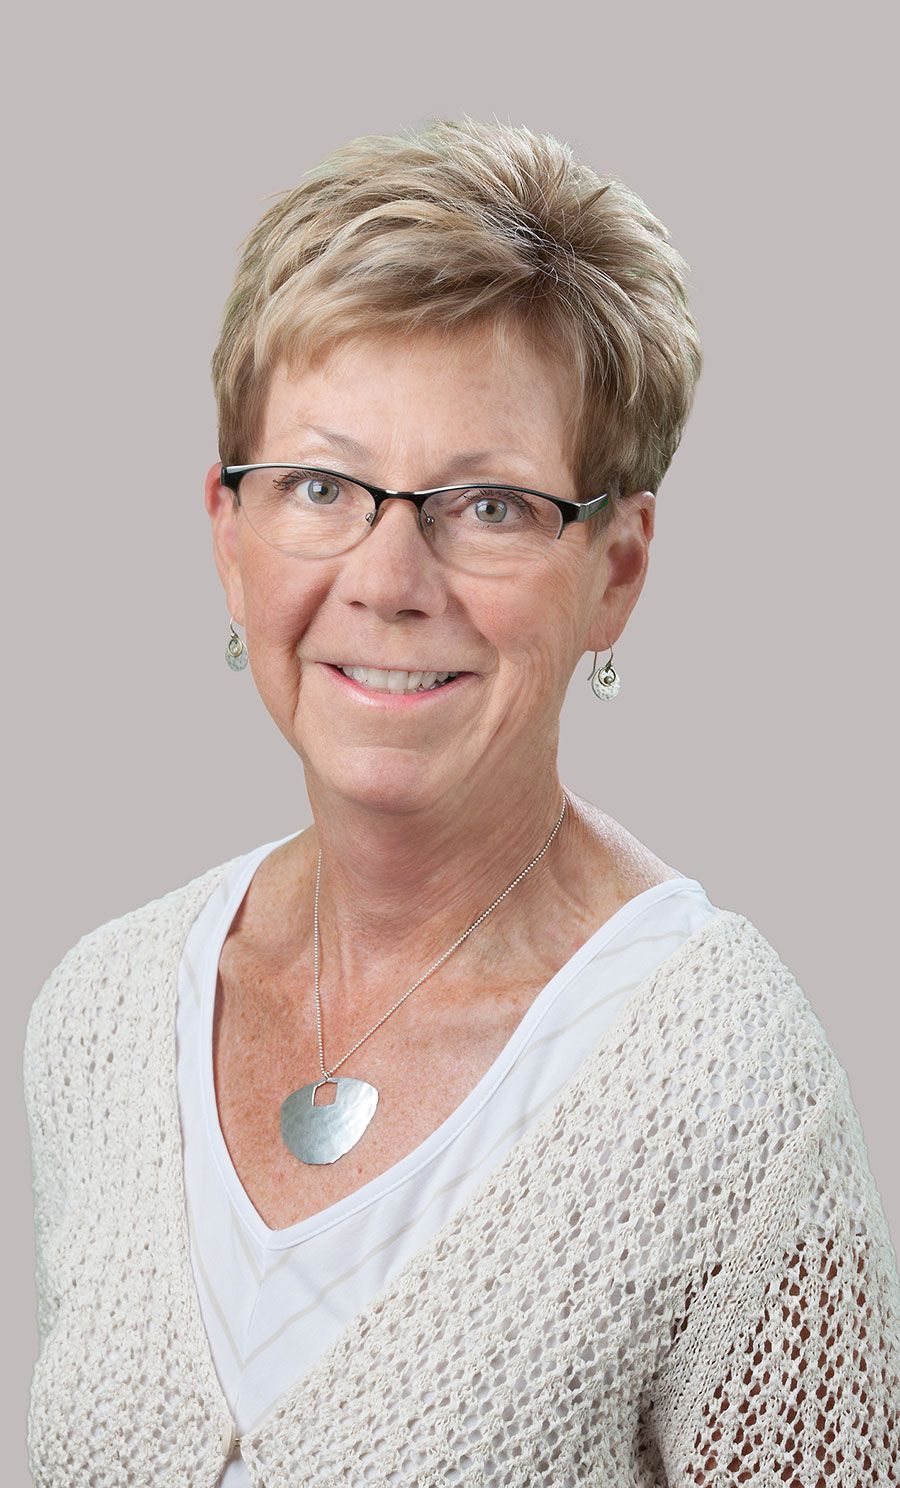 Kathy Kennel, MSN, FNP-BC, ACHPN